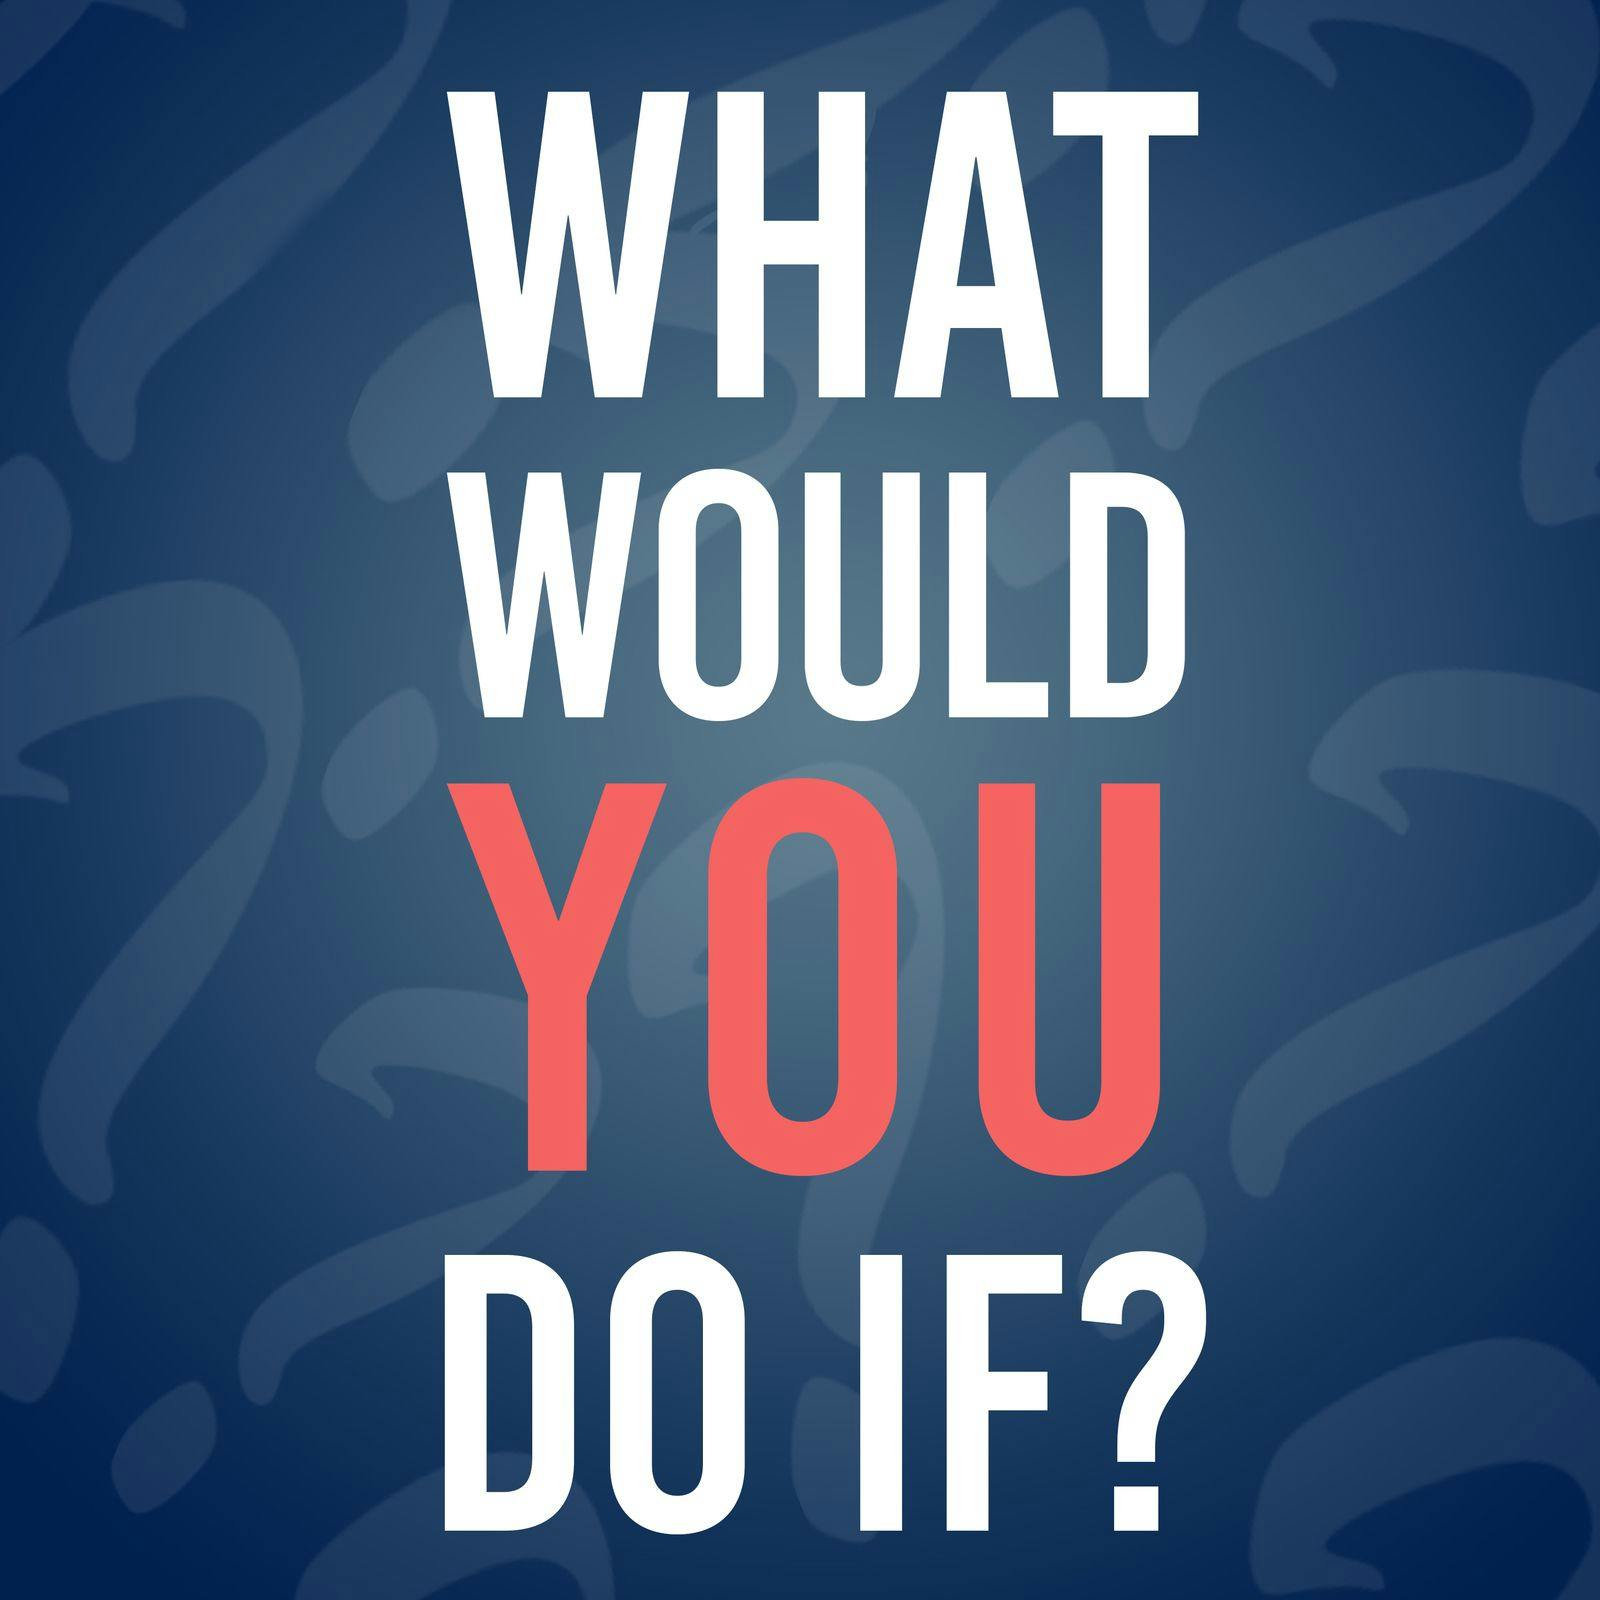 S1 Ep9: What Would You Do If You Had An STI?